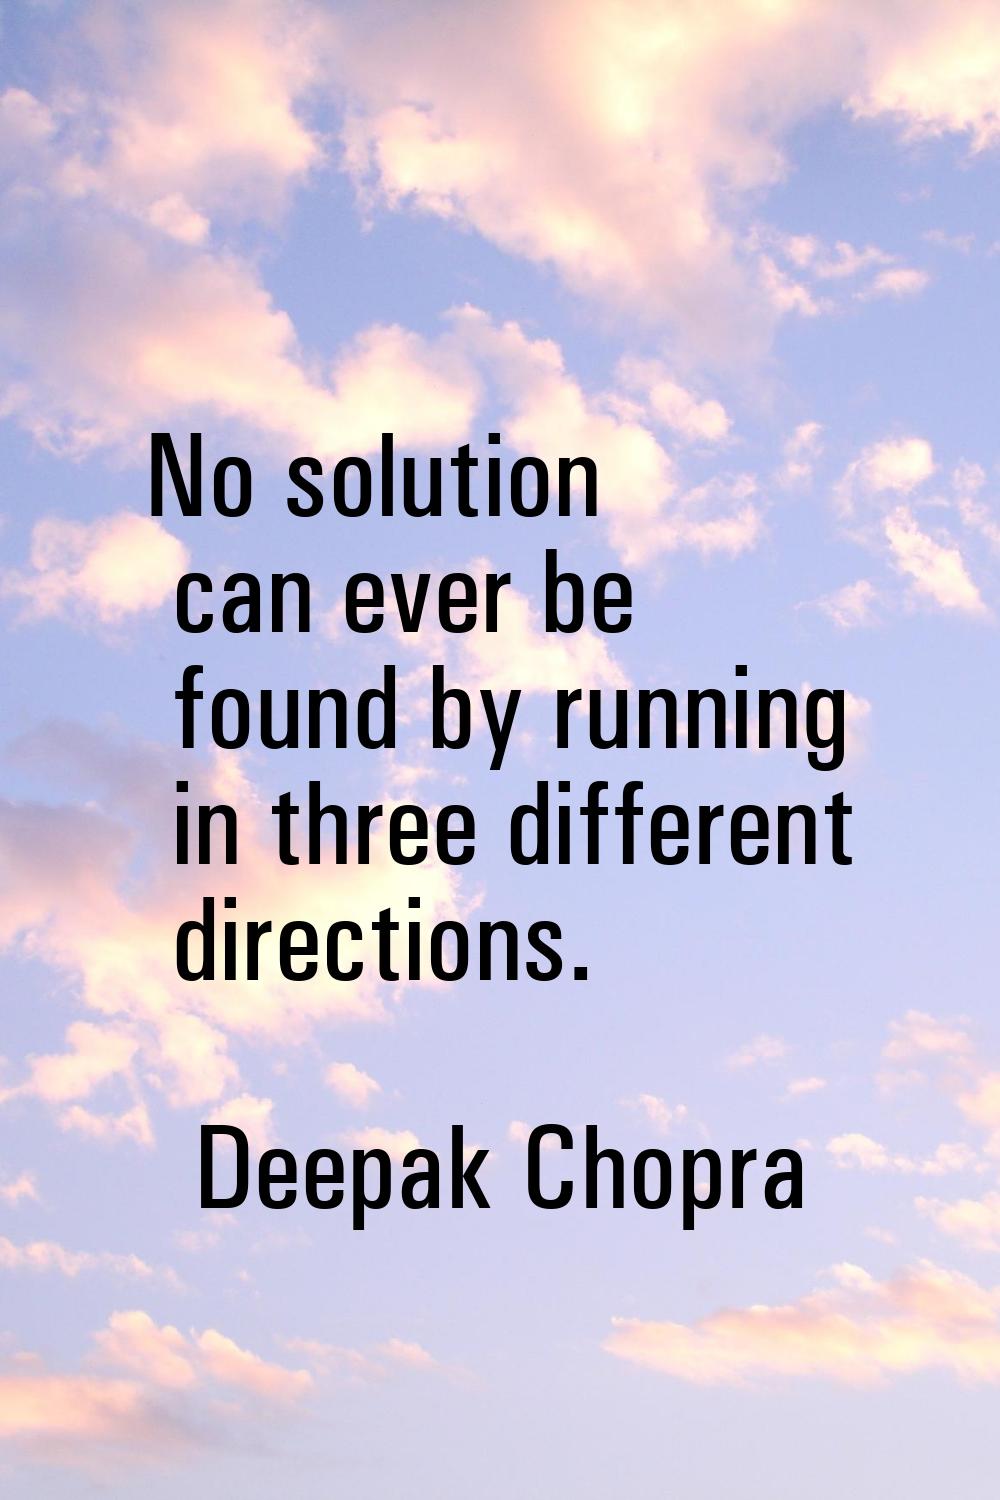 No solution can ever be found by running in three different directions.